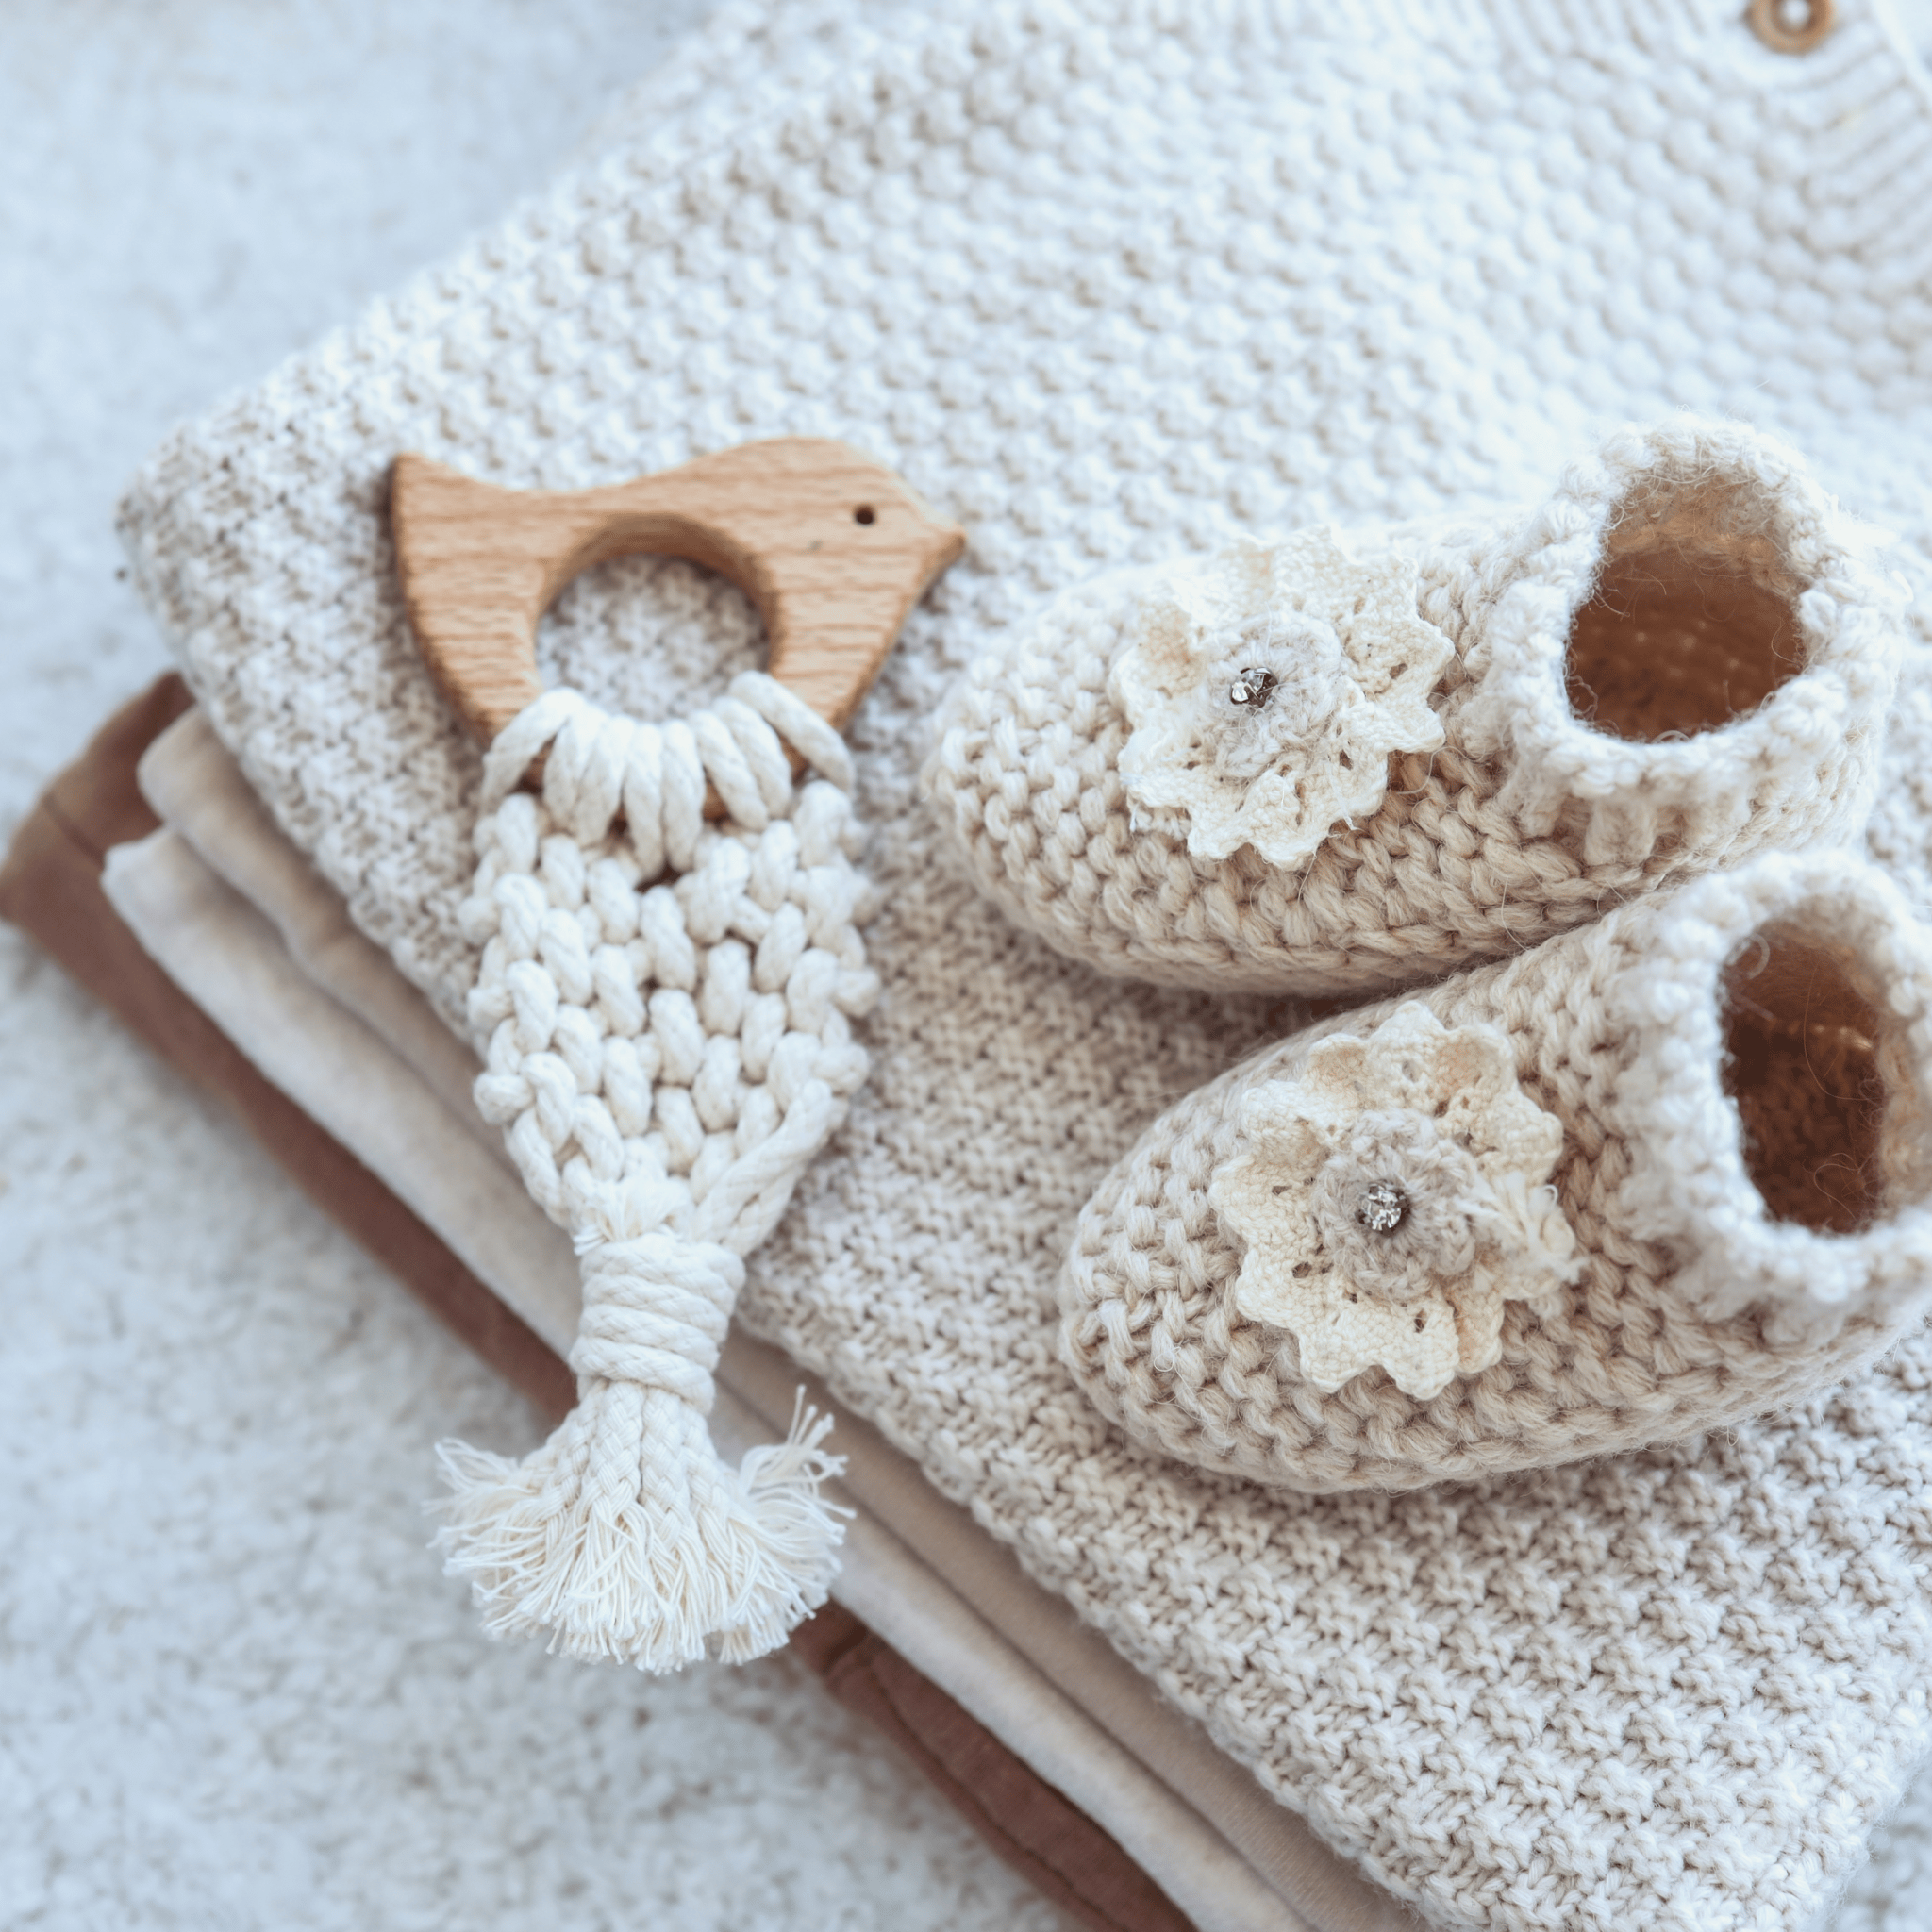 Hand-knit baby booties with floral decorations placed next to a [6-Month-Prepaid] Hooks & Needles Subscription Box #26 and a stack of knitted blankets on a light surface.